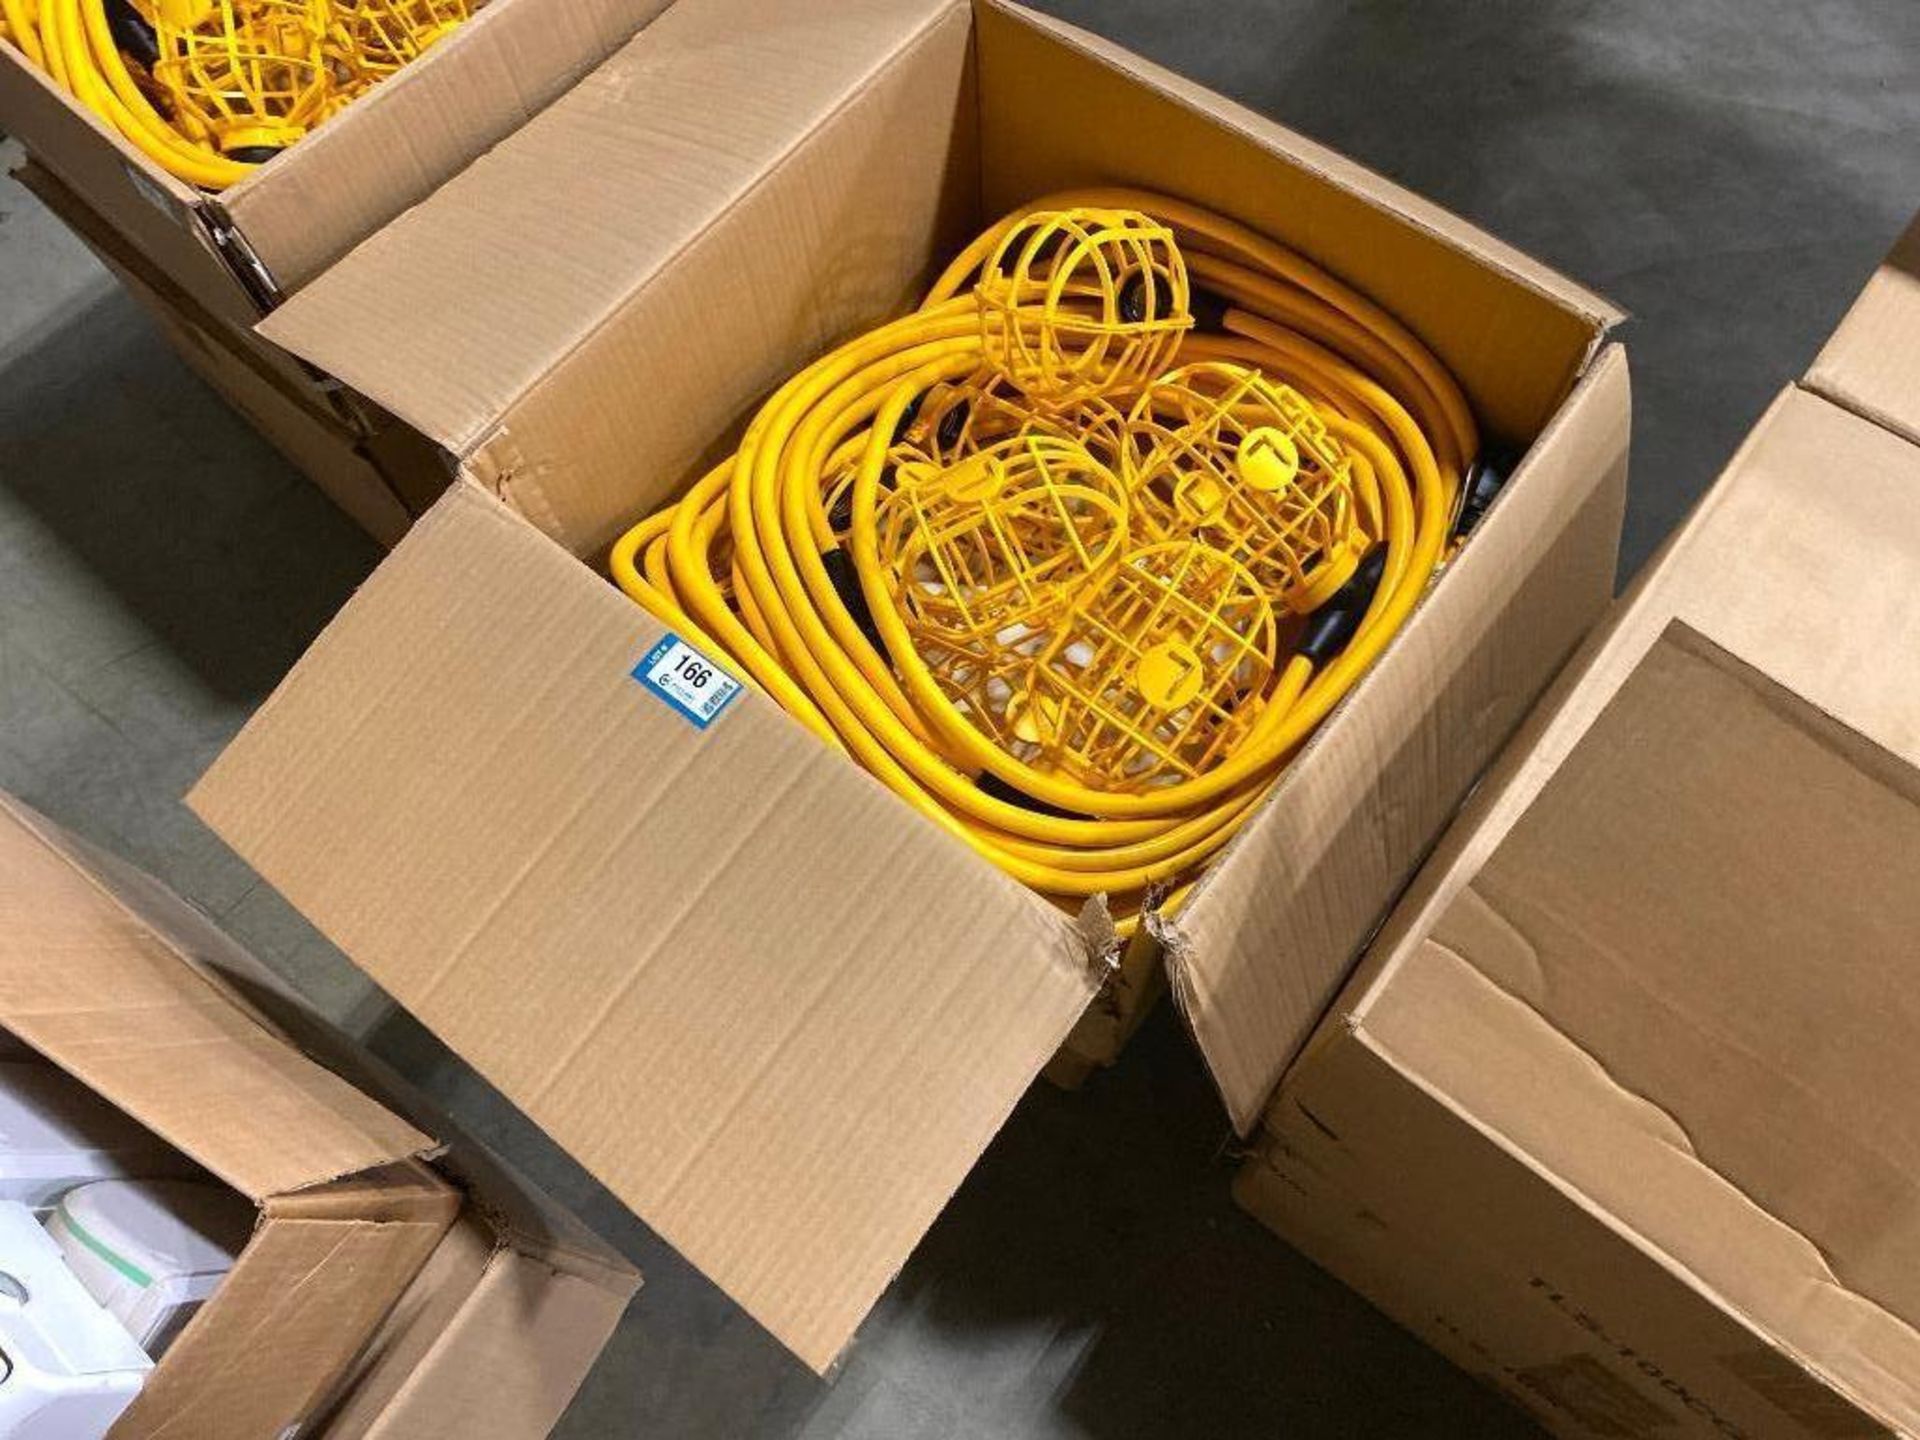 Lot of (2) Boxes of Lind Equipment String Lighting, TLS-100CG - Image 2 of 6